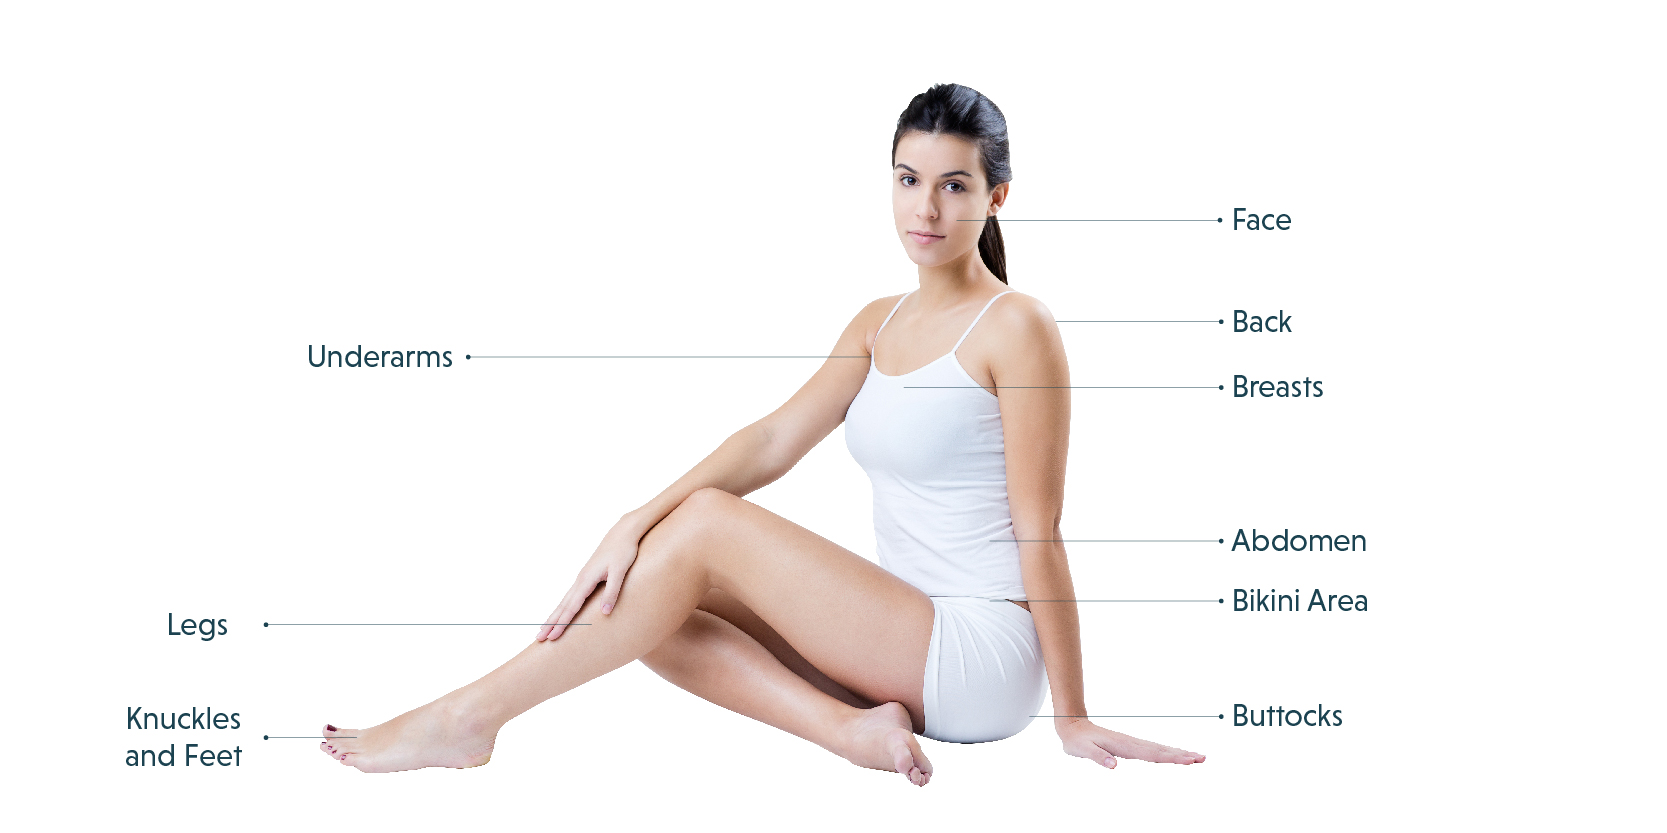 Body Areas Treated By Laser Hair Removal